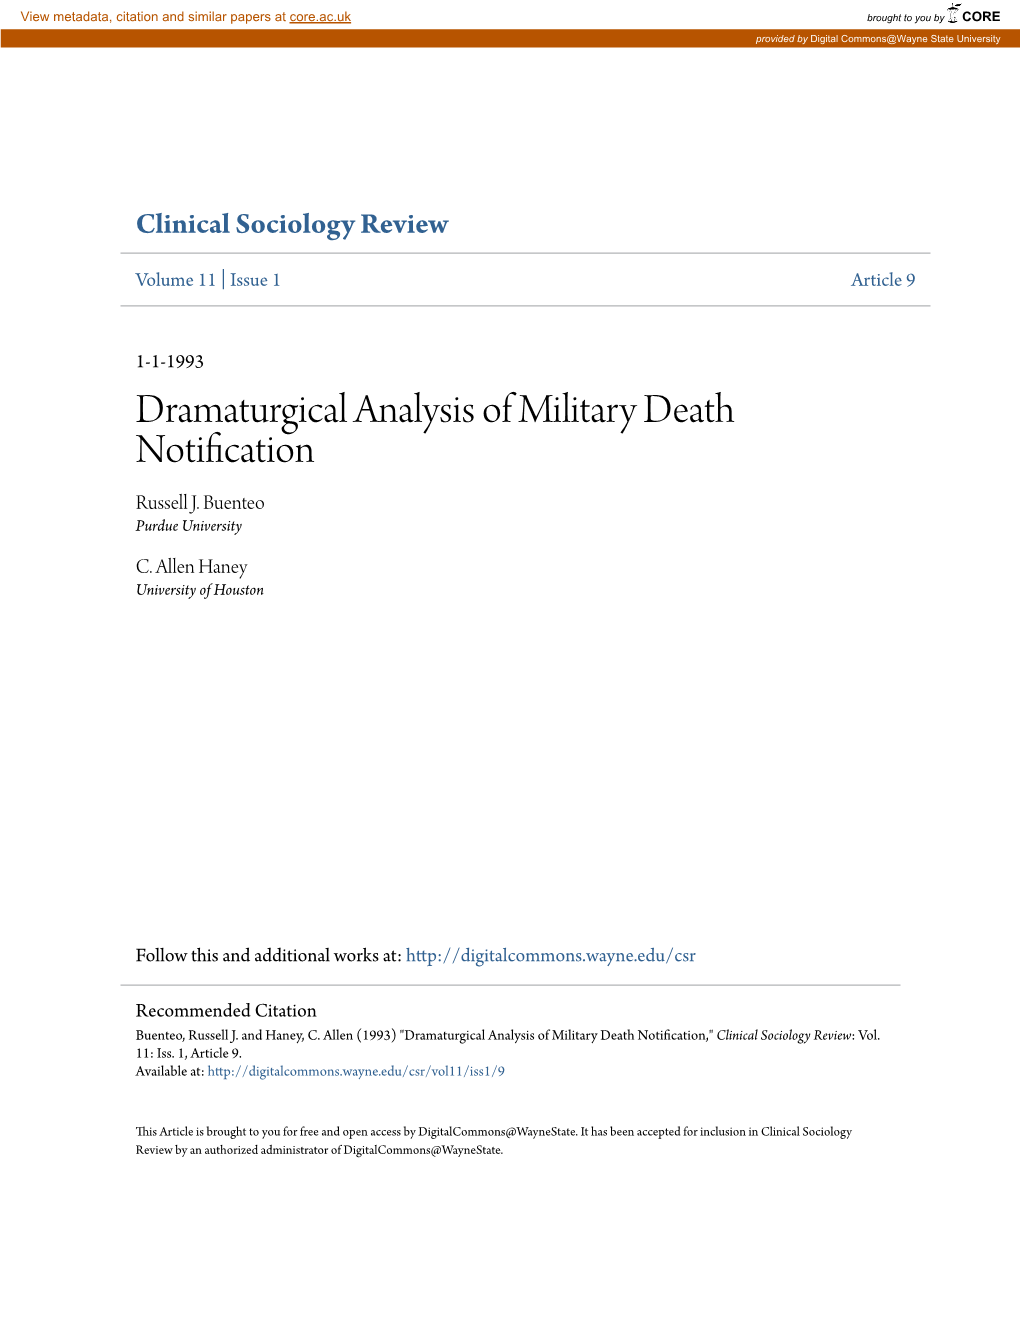 Dramaturgical Analysis of Military Death Notification Russell J